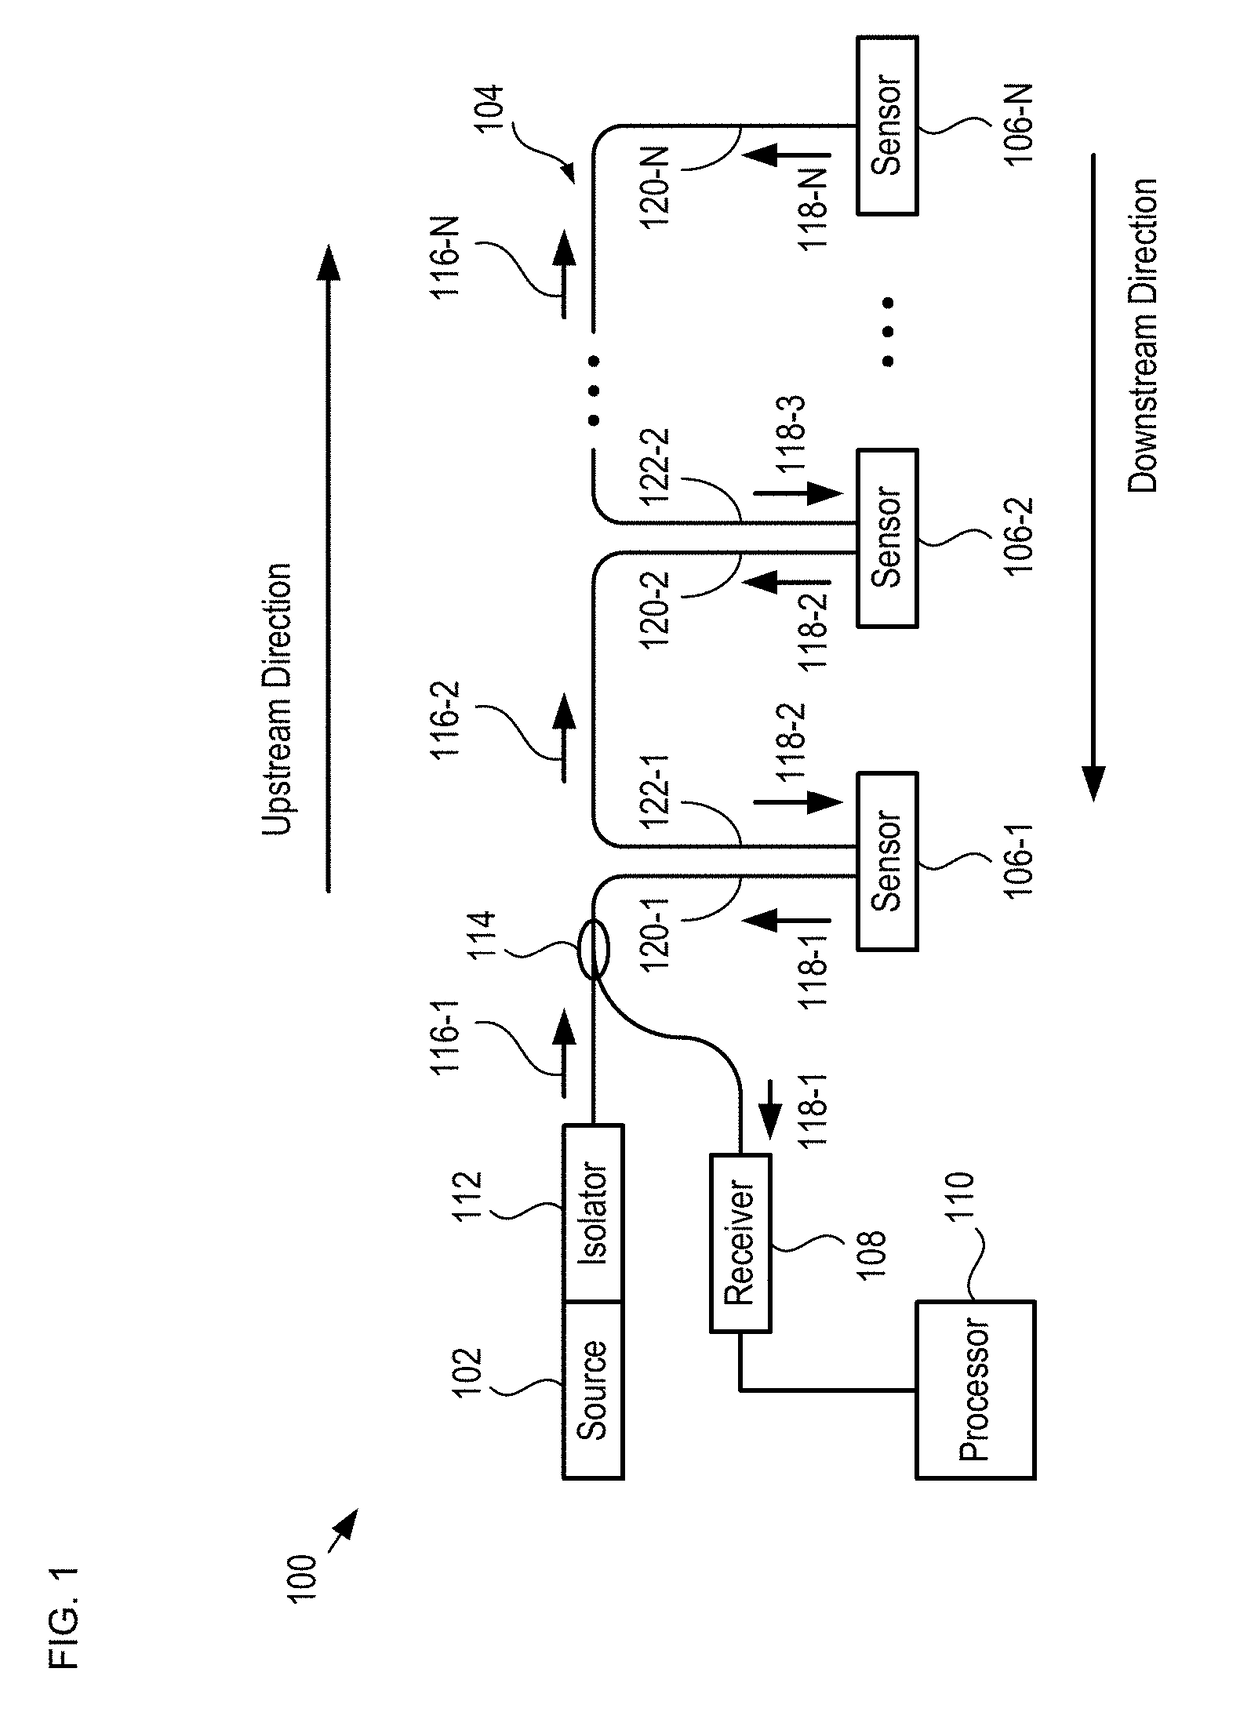 Multiplexed Fiber-Coupled Fabry-Perot Sensors and Method Therefor